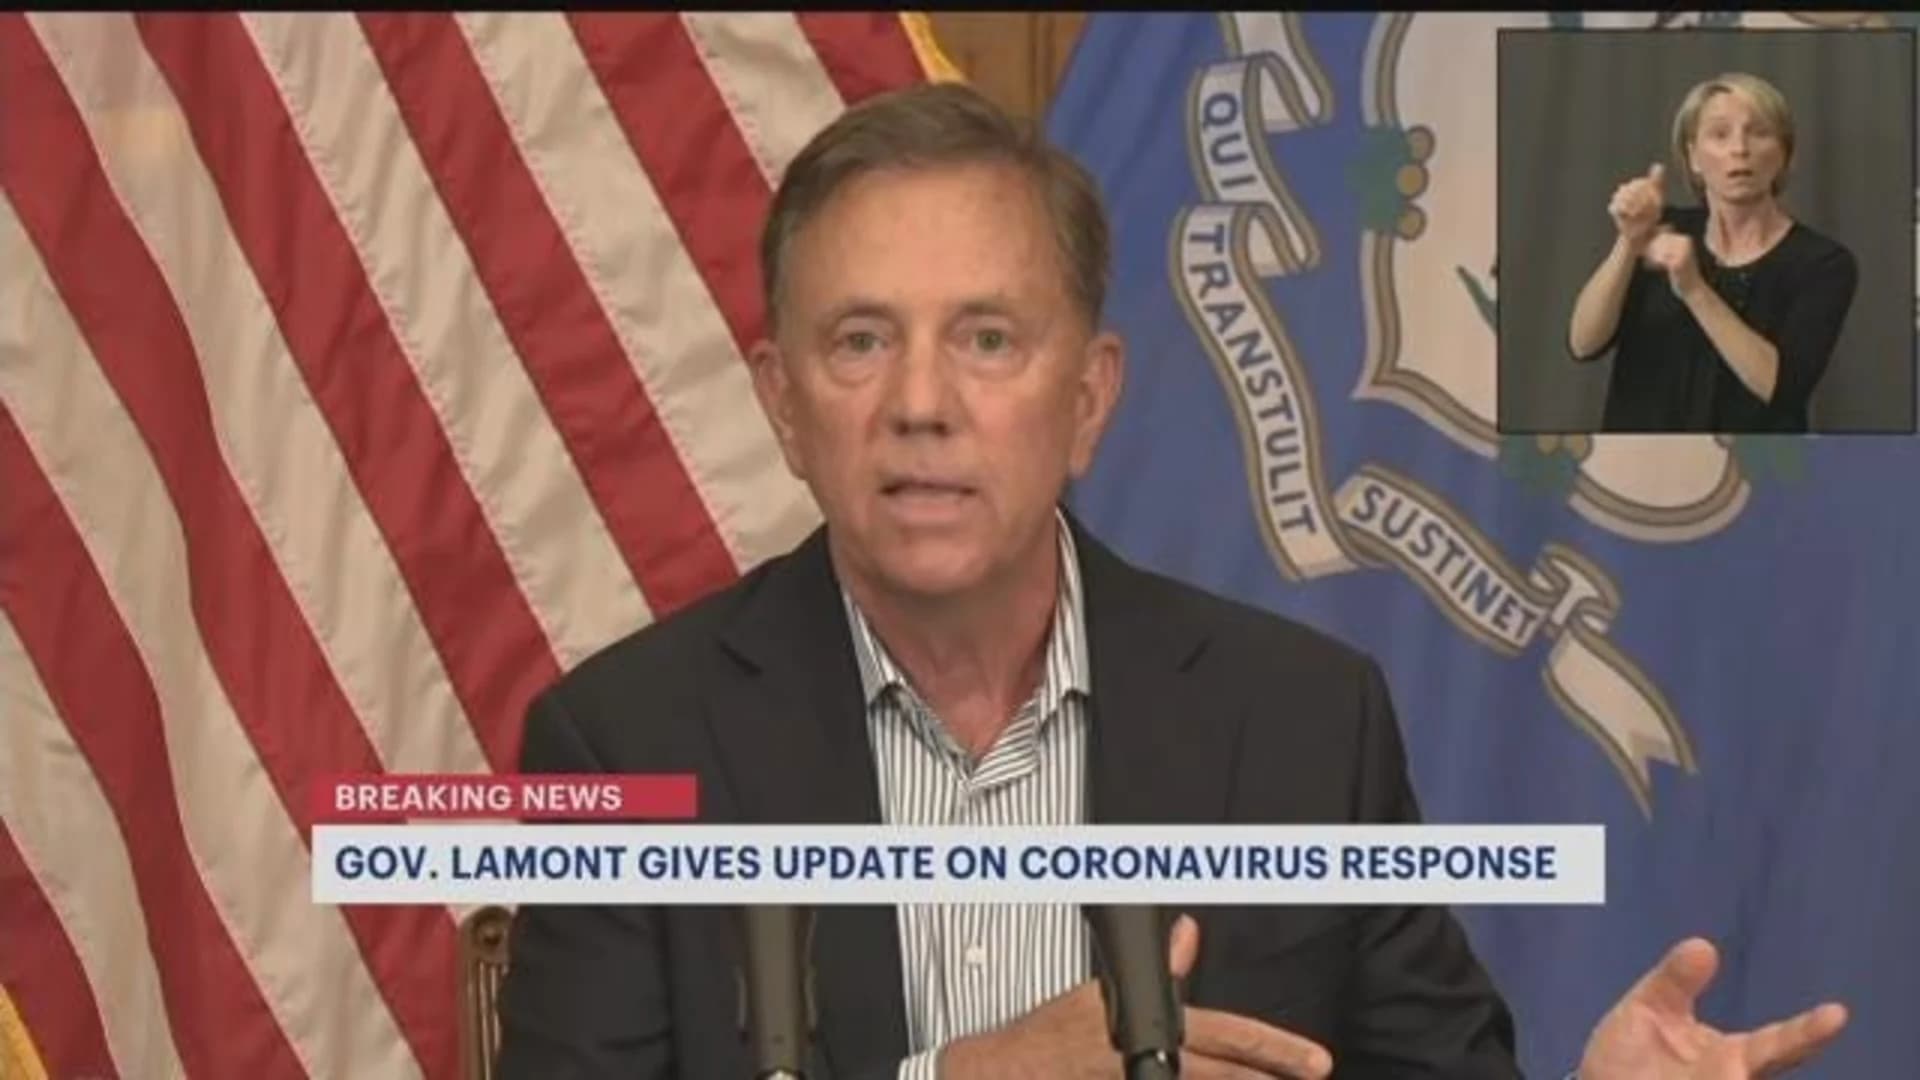 Danbury sees spike in coronavirus cases with positivity rate at 7%